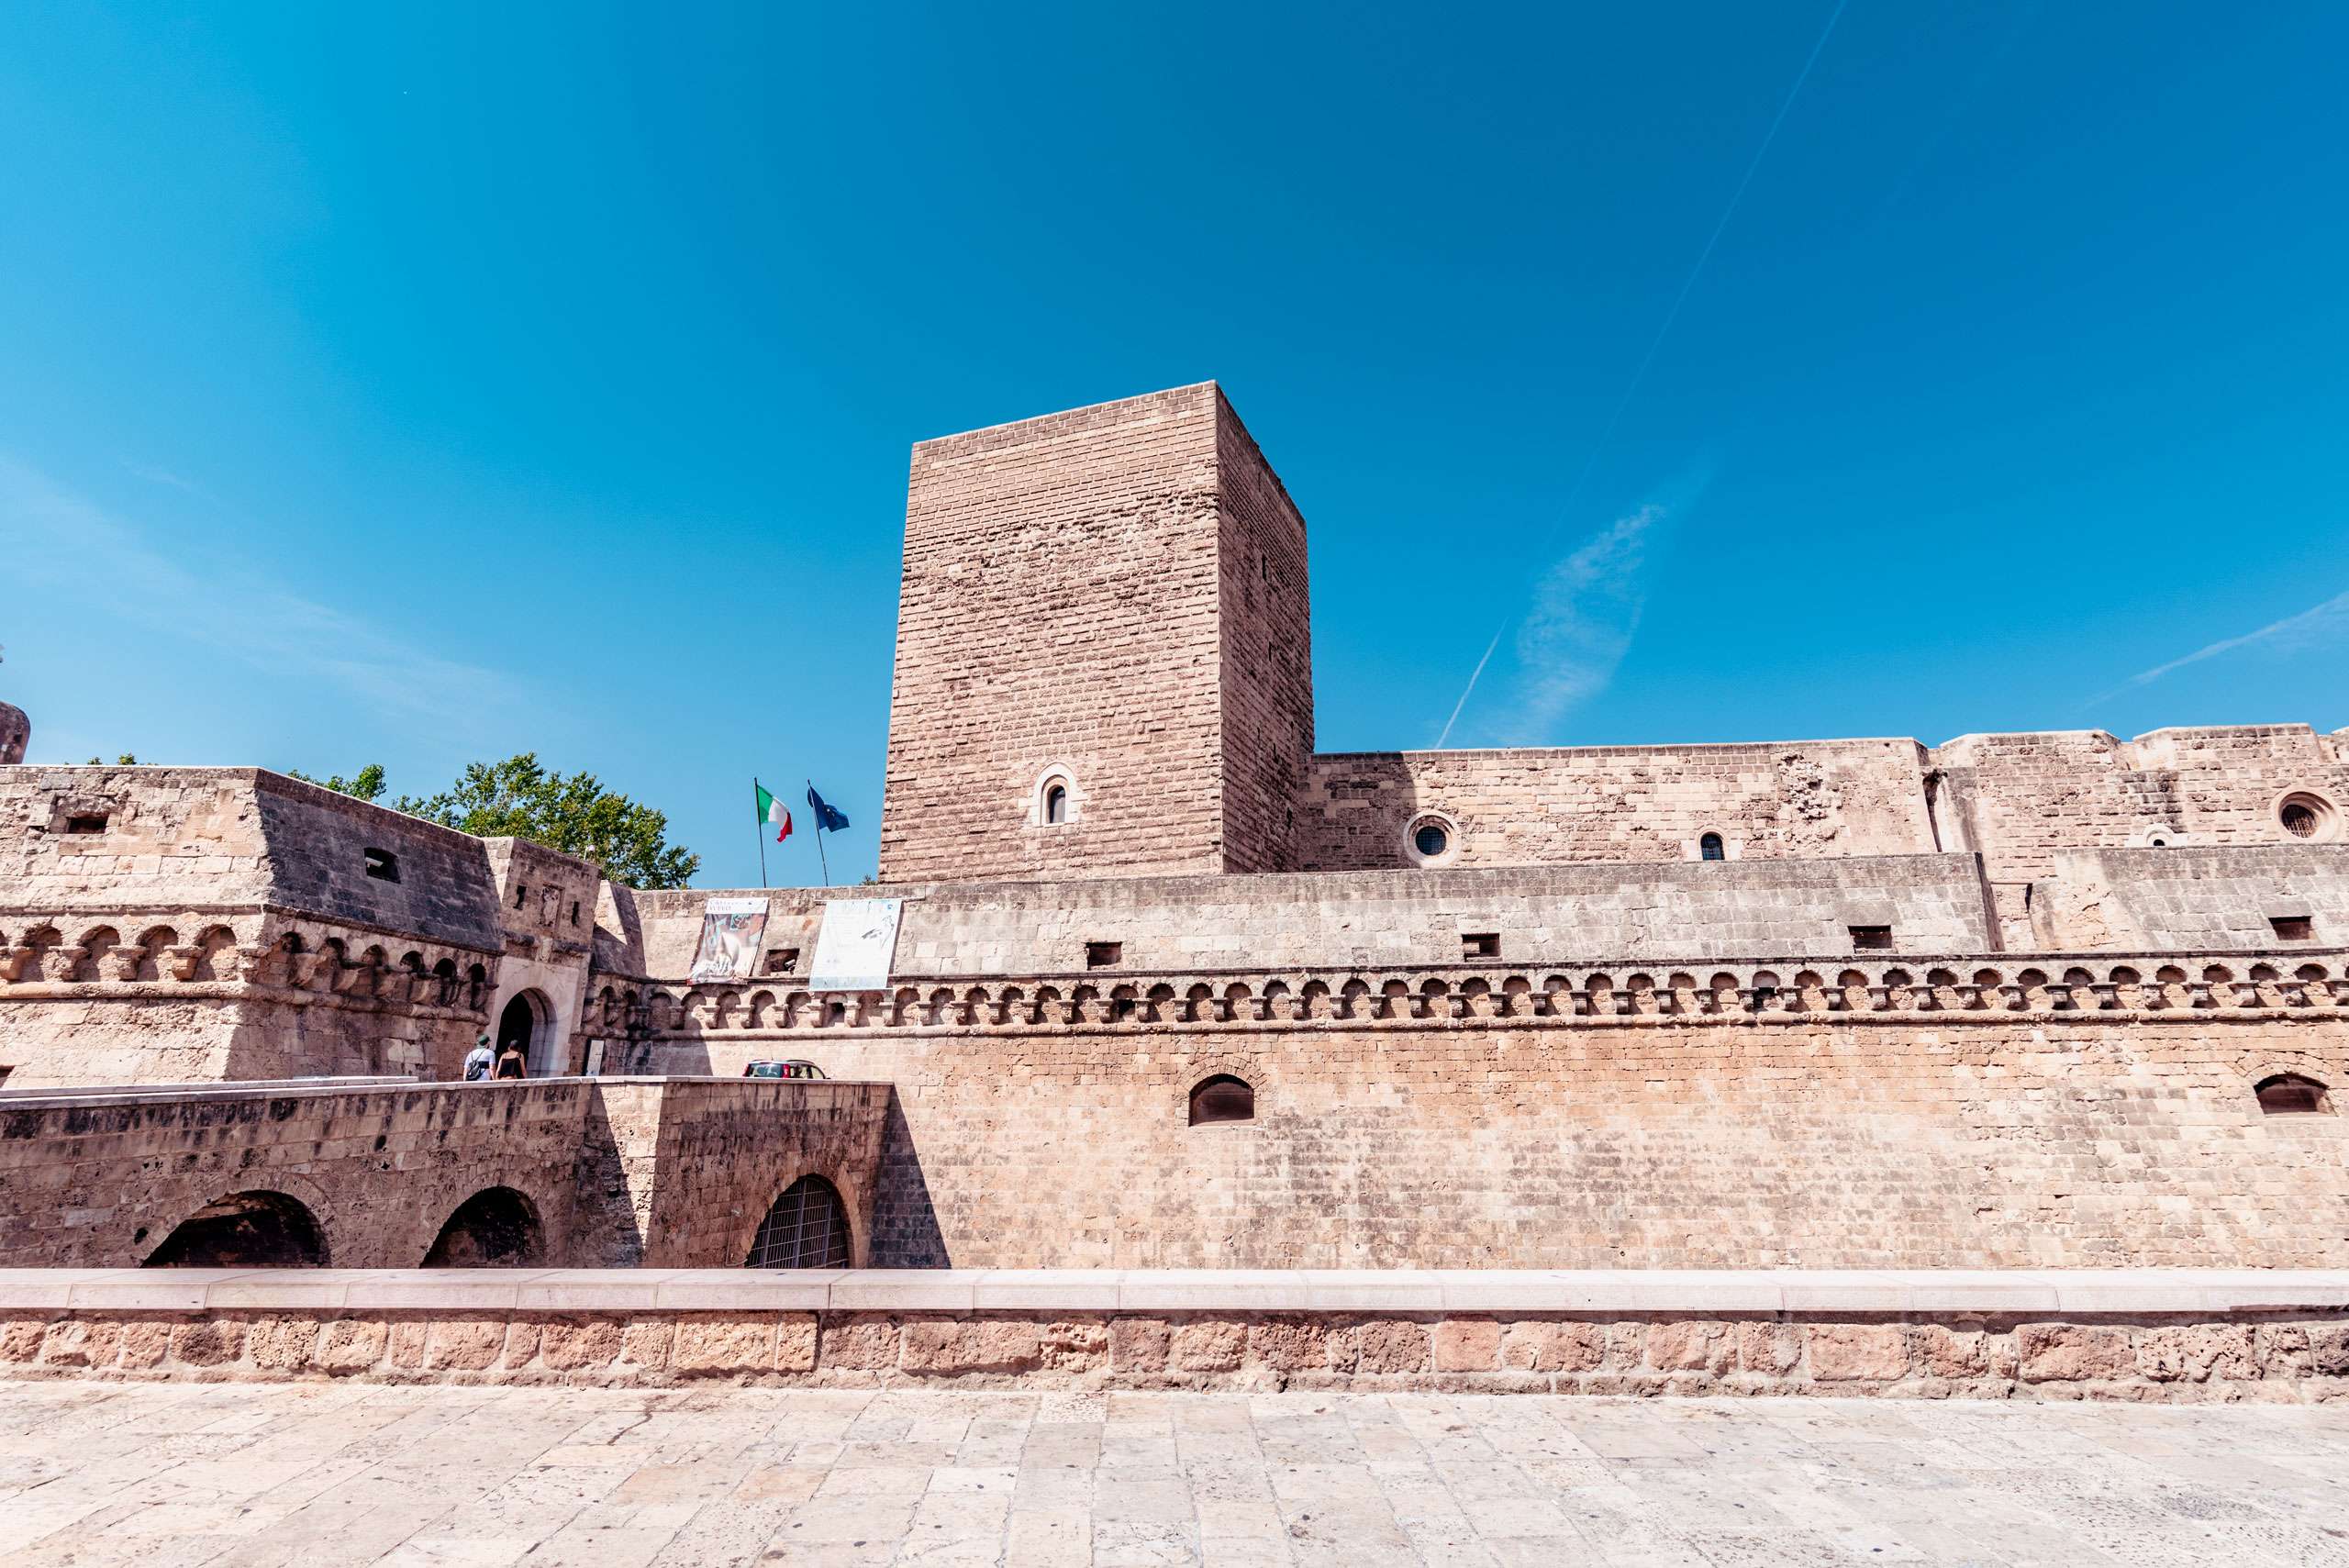 Swabian Castle in the old town of Bari city.